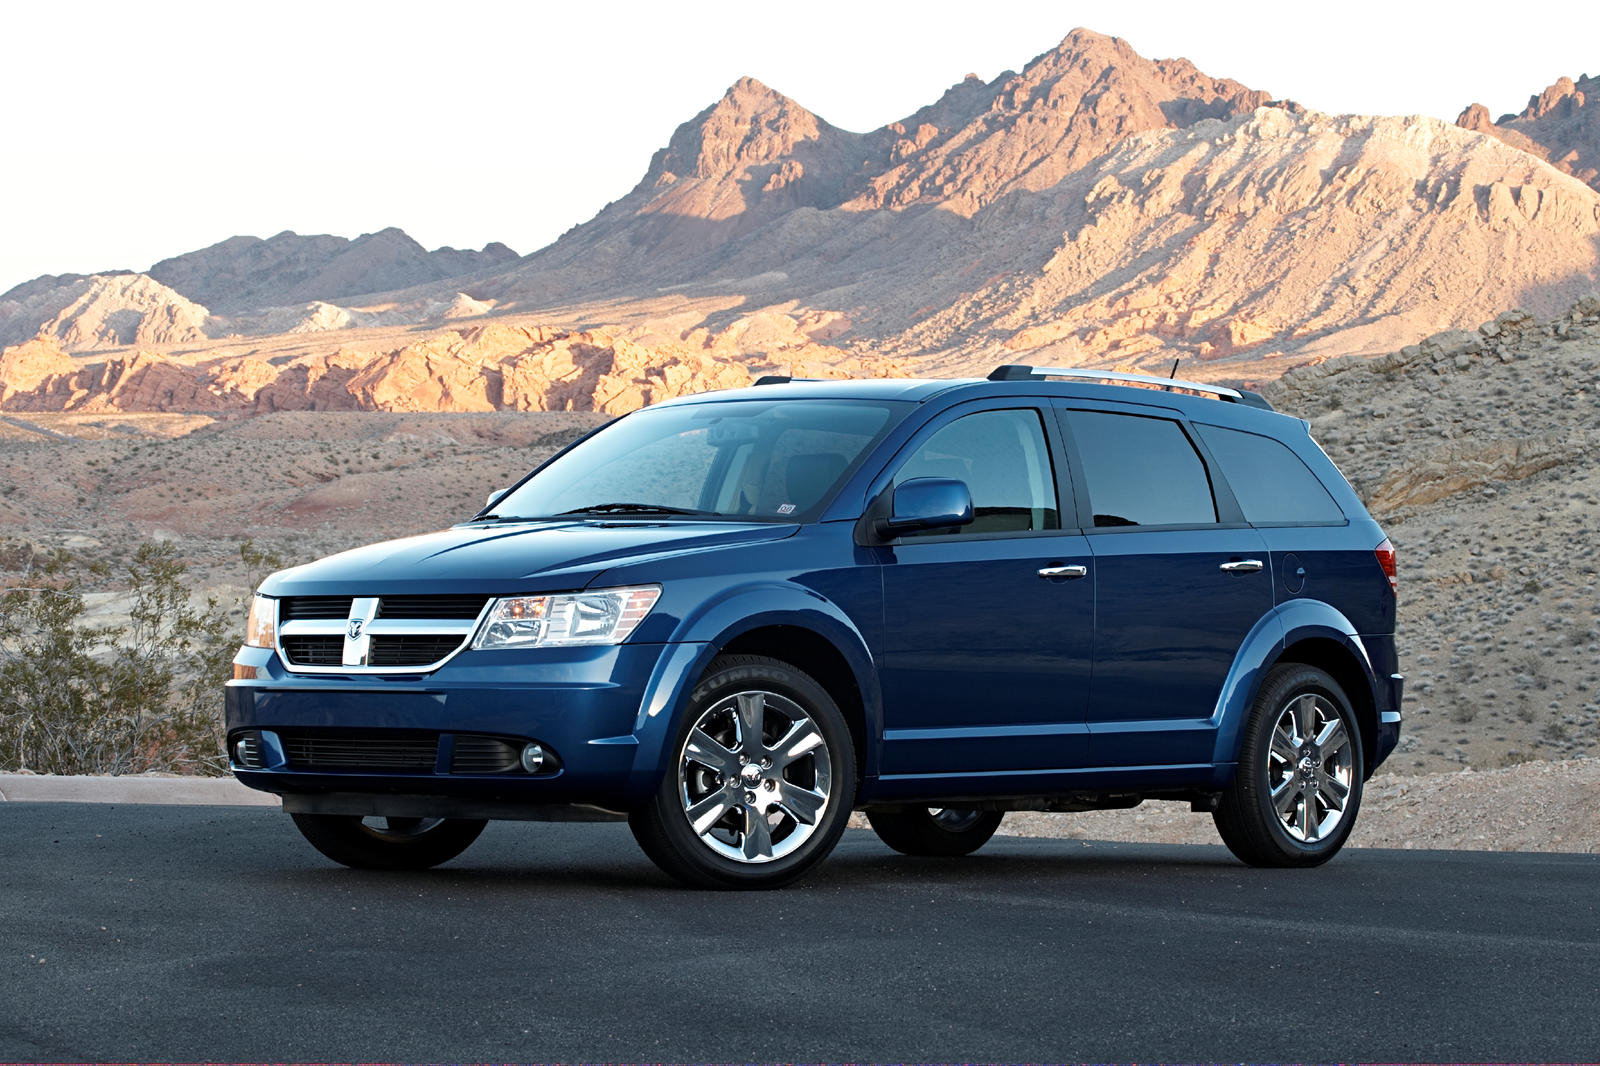 2010 dodge journey reviews consumer reports